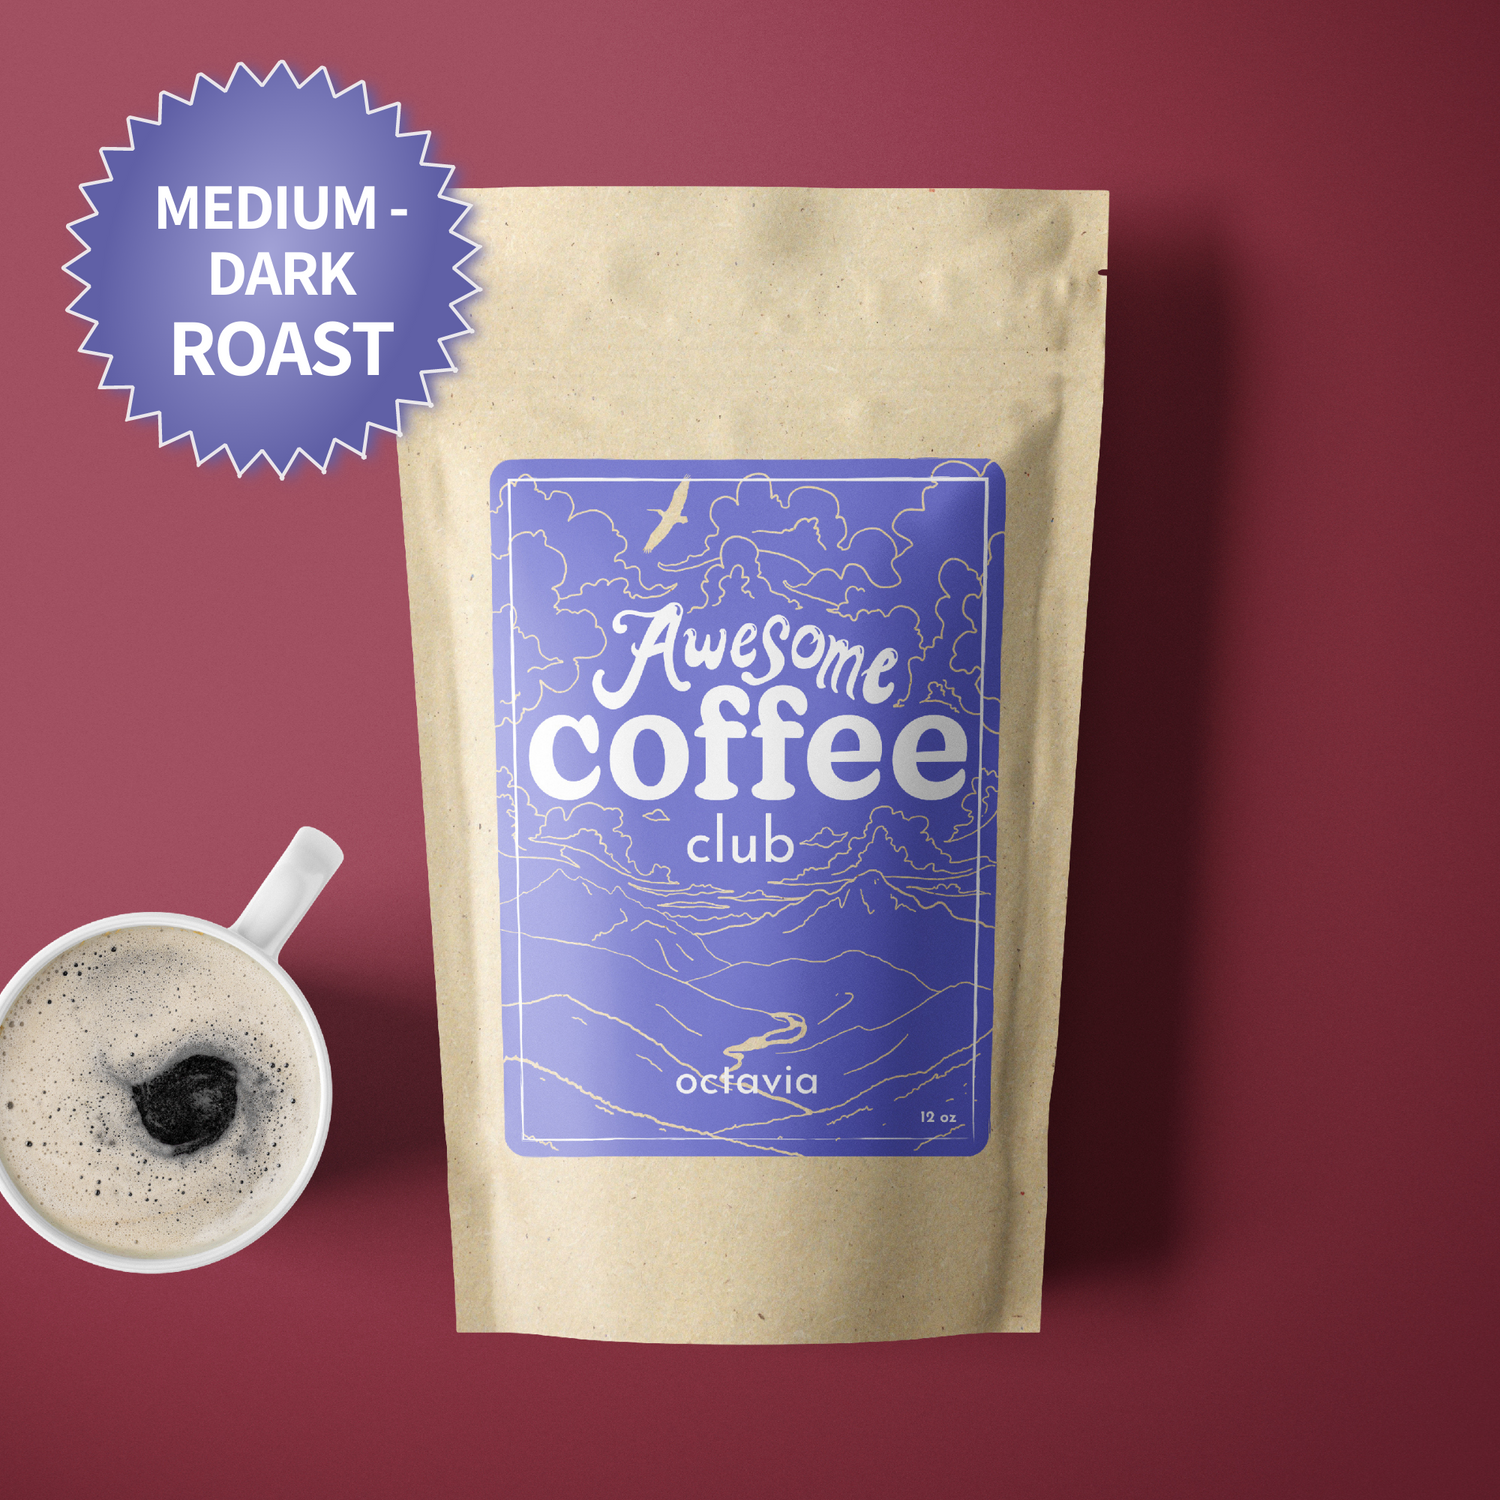 A photo of a brown bag of coffee with a light purple label that shows a mountain scene and has the text "Awesome Coffee Club; Octavia". The bag sites atop a maroon background with a cup of coffee next to it. There is a purple badge in the lefthand corner that reads "Medium-Dark Roast". 